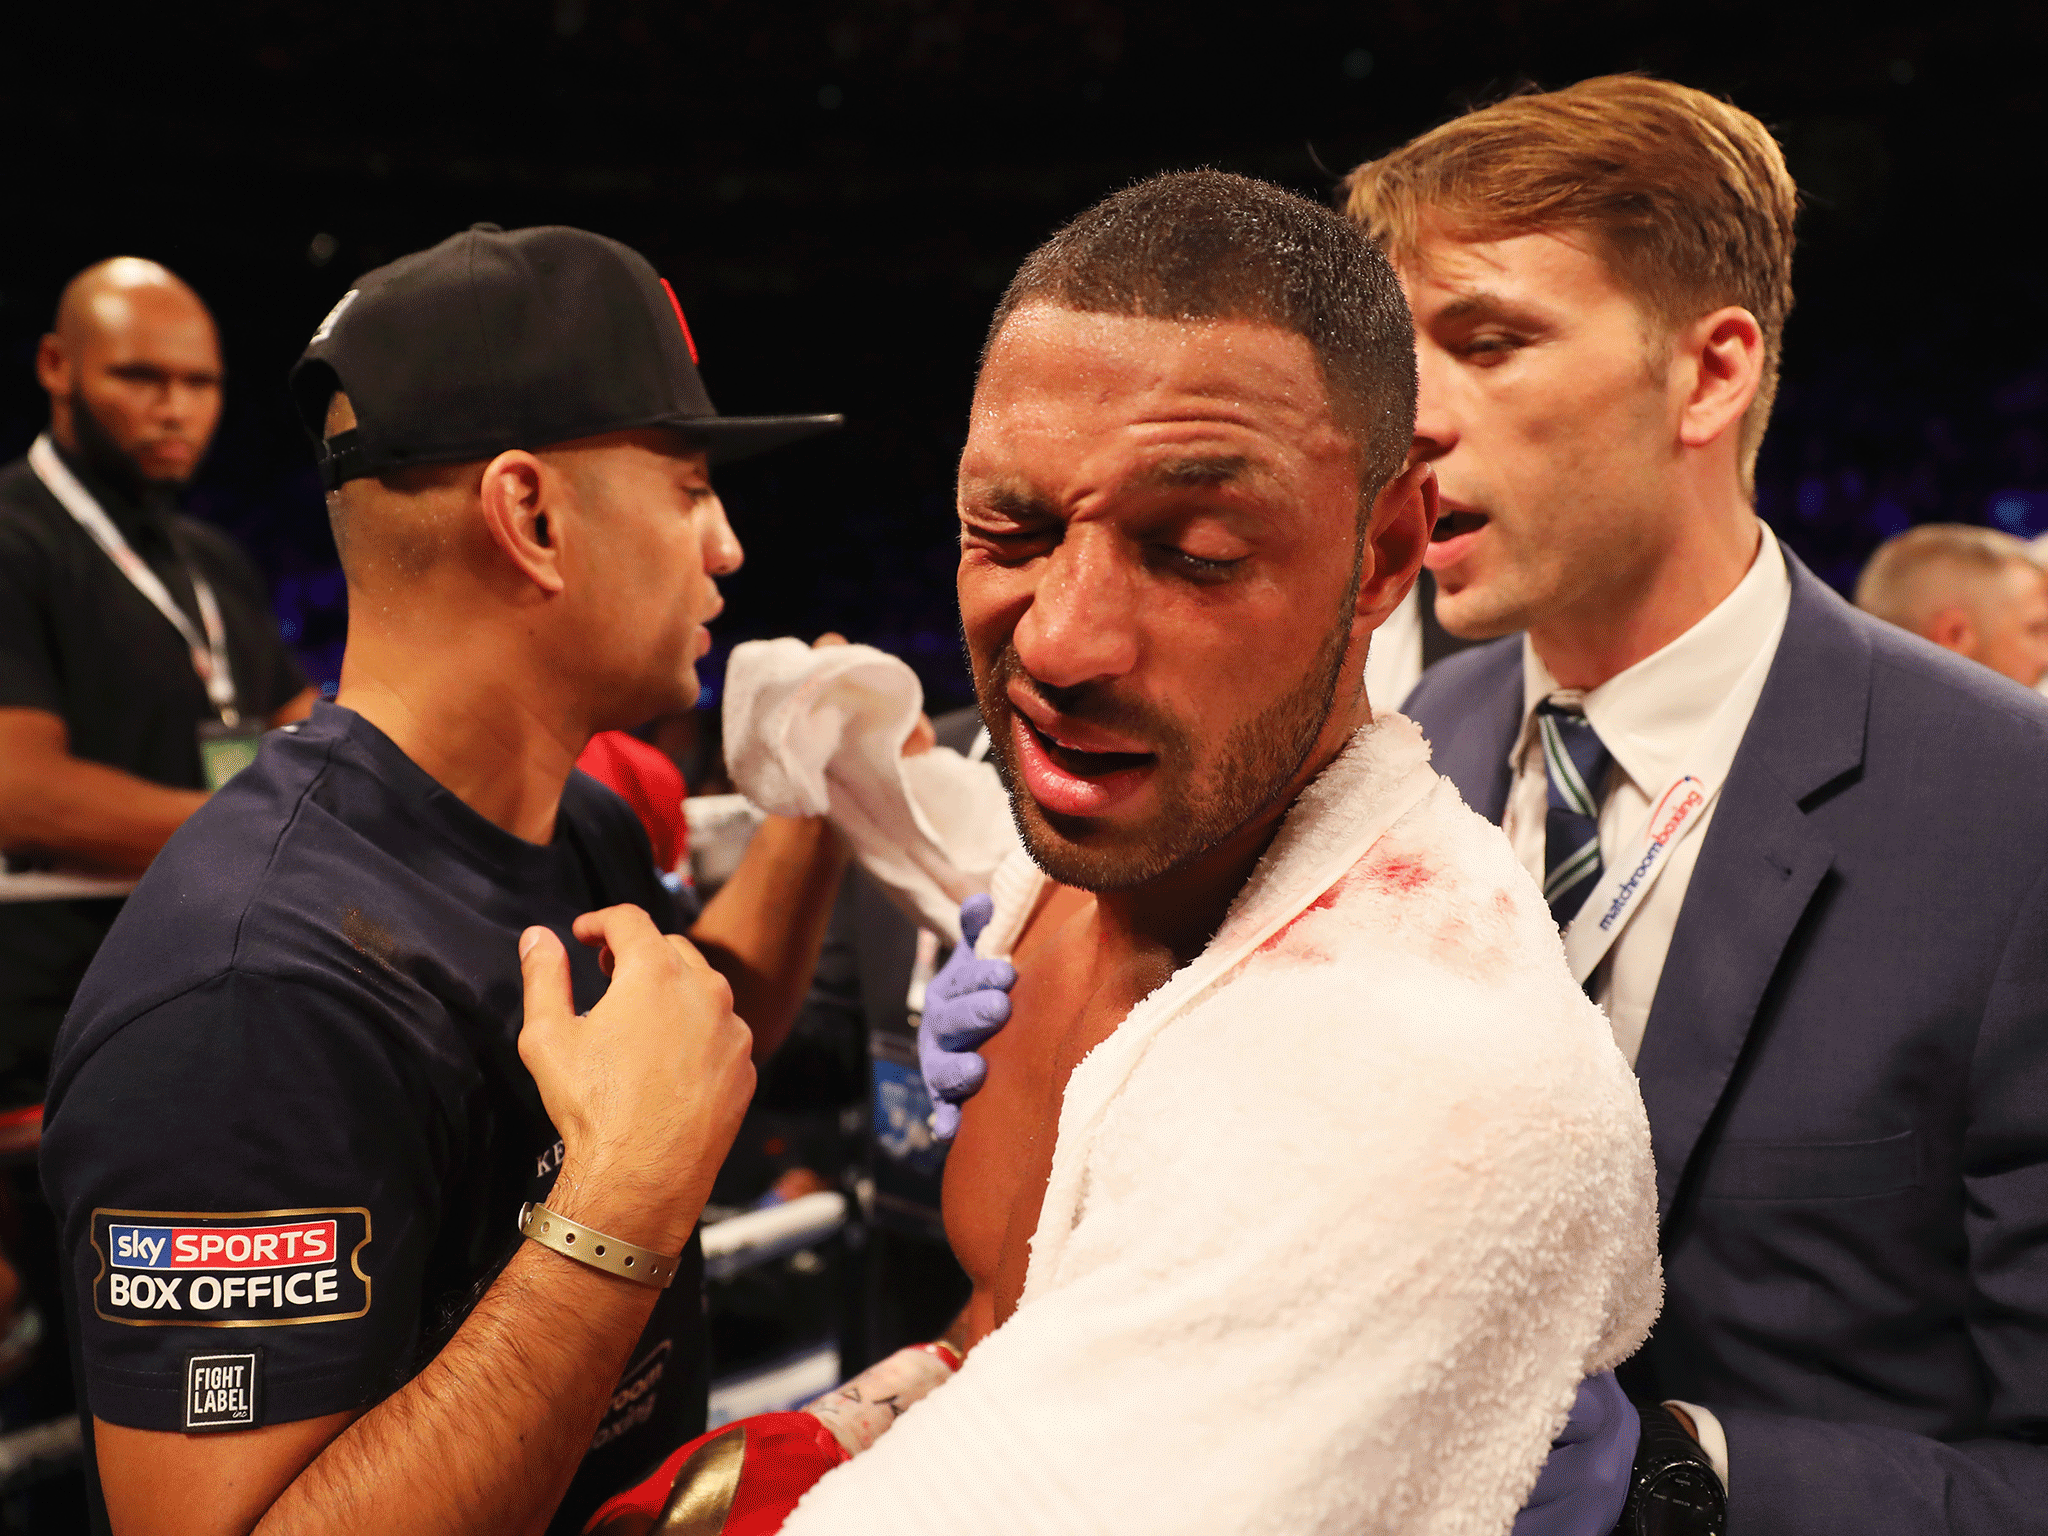 Brook's eye socket was damaged early on in the fight